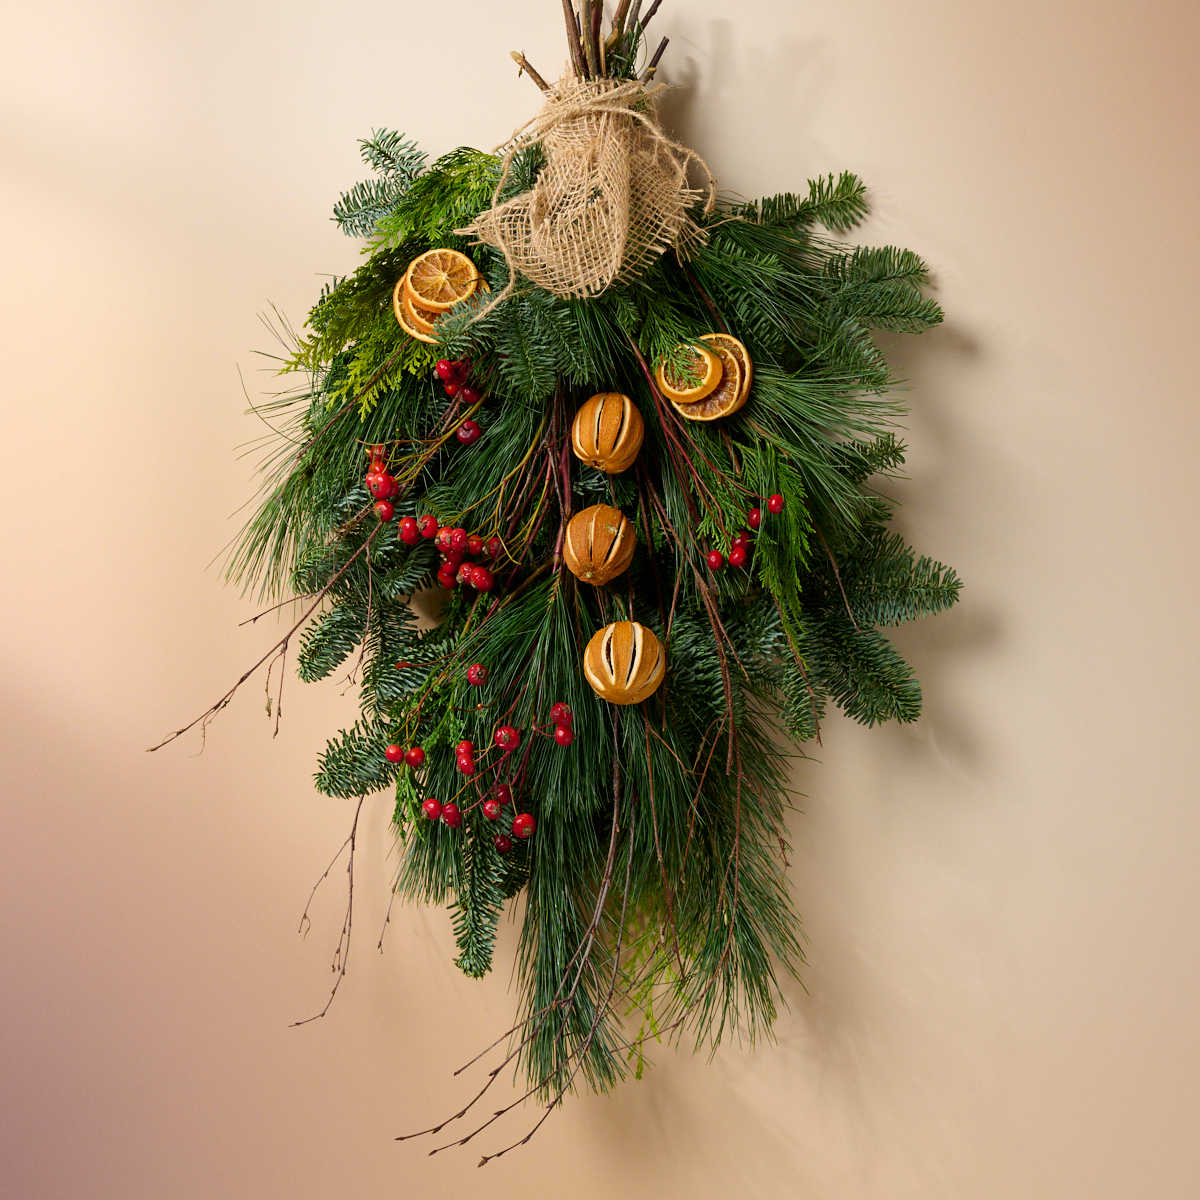 How Long Does a Real Christmas Wreath Last?